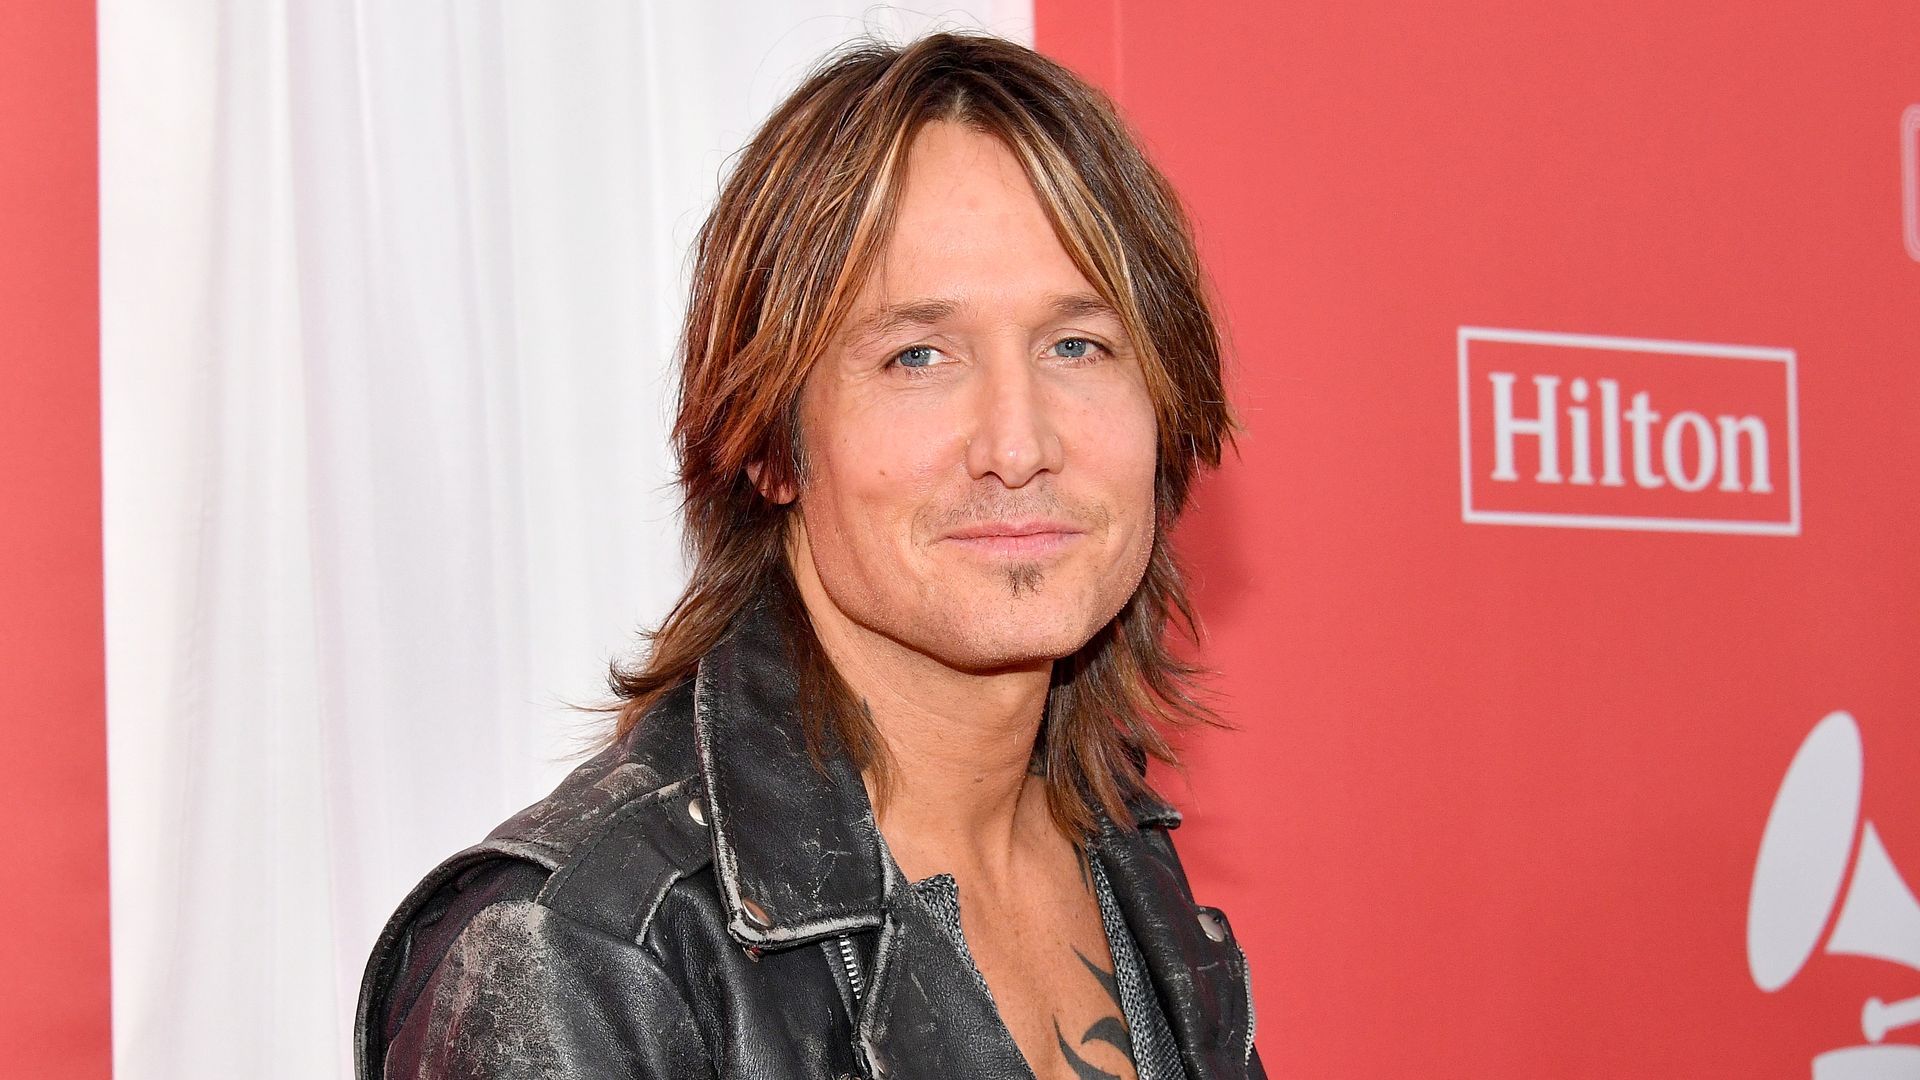   Recording artist Keith Urban attends MusiCares Person of the Year honoring Fleetwood Mac at Radio City Music Hall on January 26, 2018 in New York City.  (Photo by Dia Dipasupil/Getty Images )